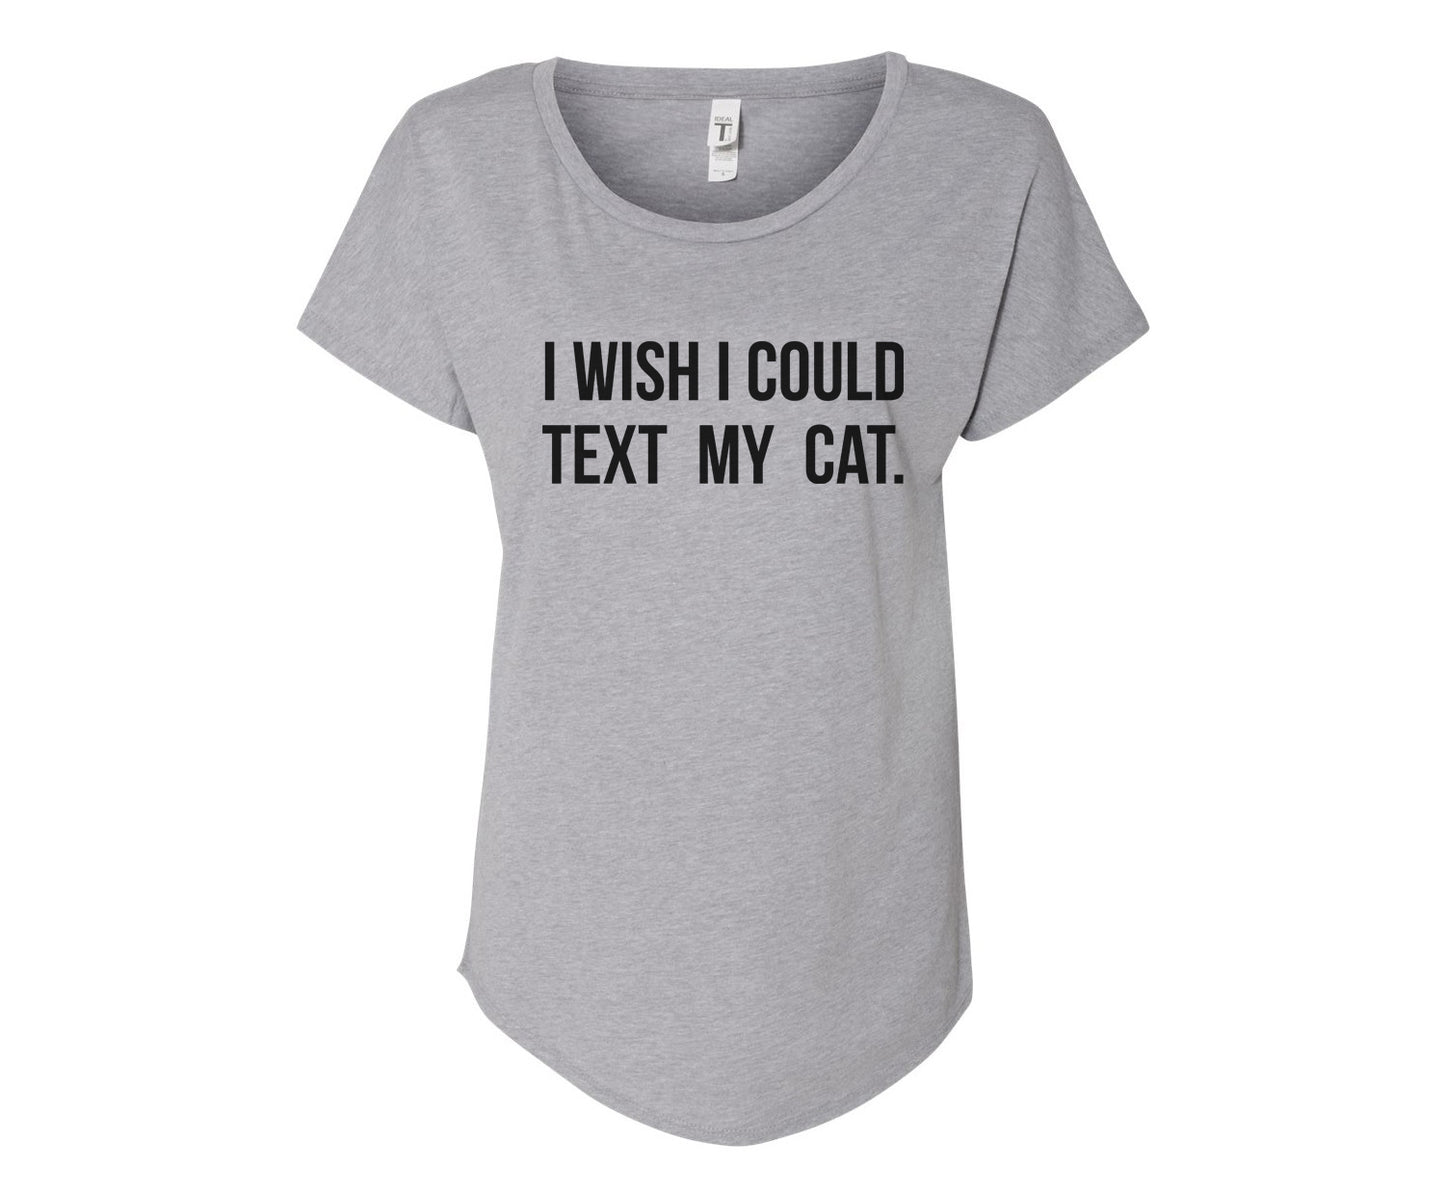 I Wish I Could Text My Cat Ladies Tee Shirt - In Grey & White